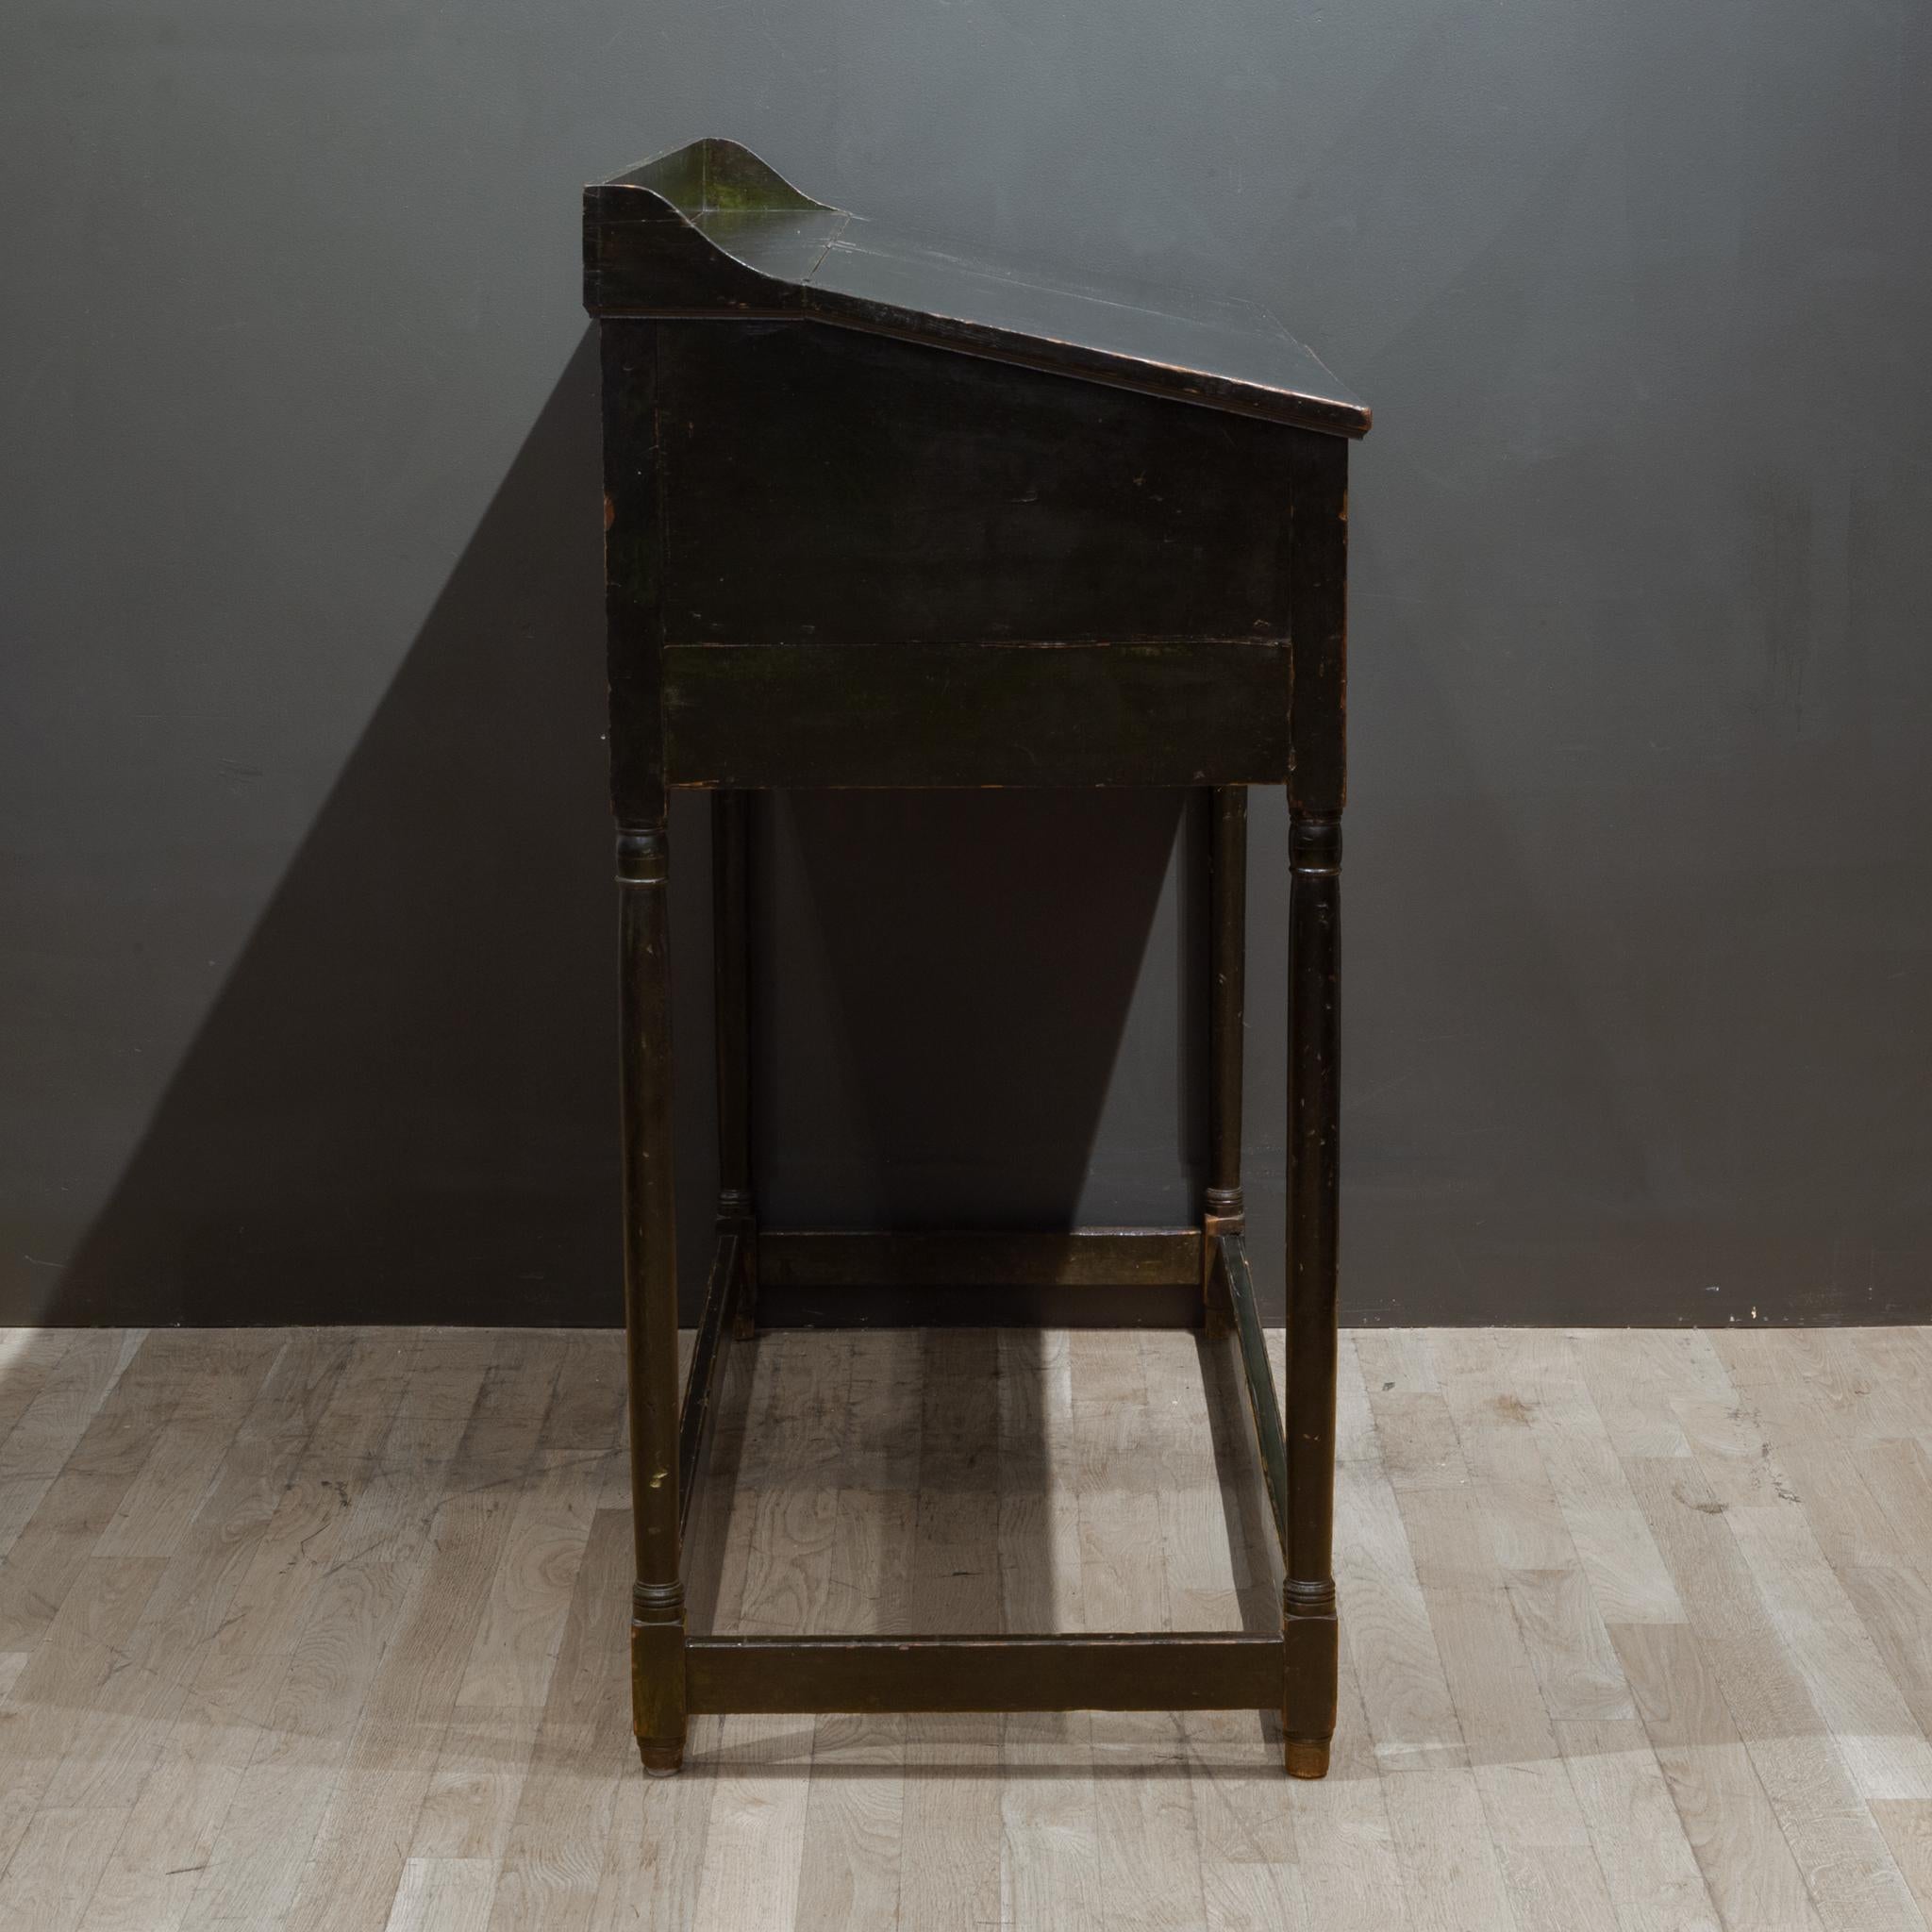 American Mid 19th C. Postmaster's Desk, c.1850-Contact us for more affordable shipping 